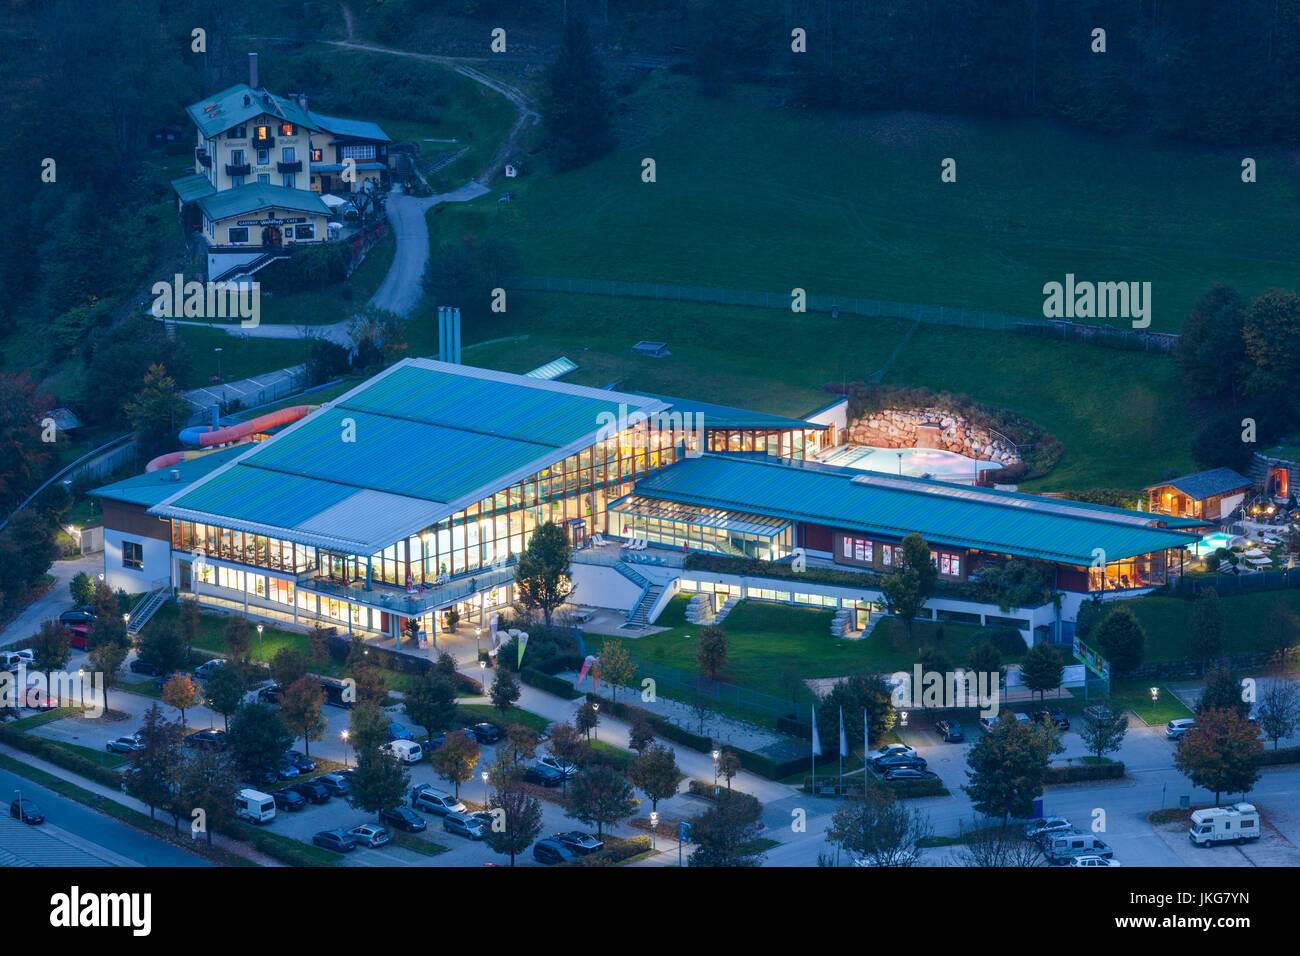 Germany, Bavaria, Berchtesgaden, elevated view of the Watzmann Therme water park, dusk Stock Photo